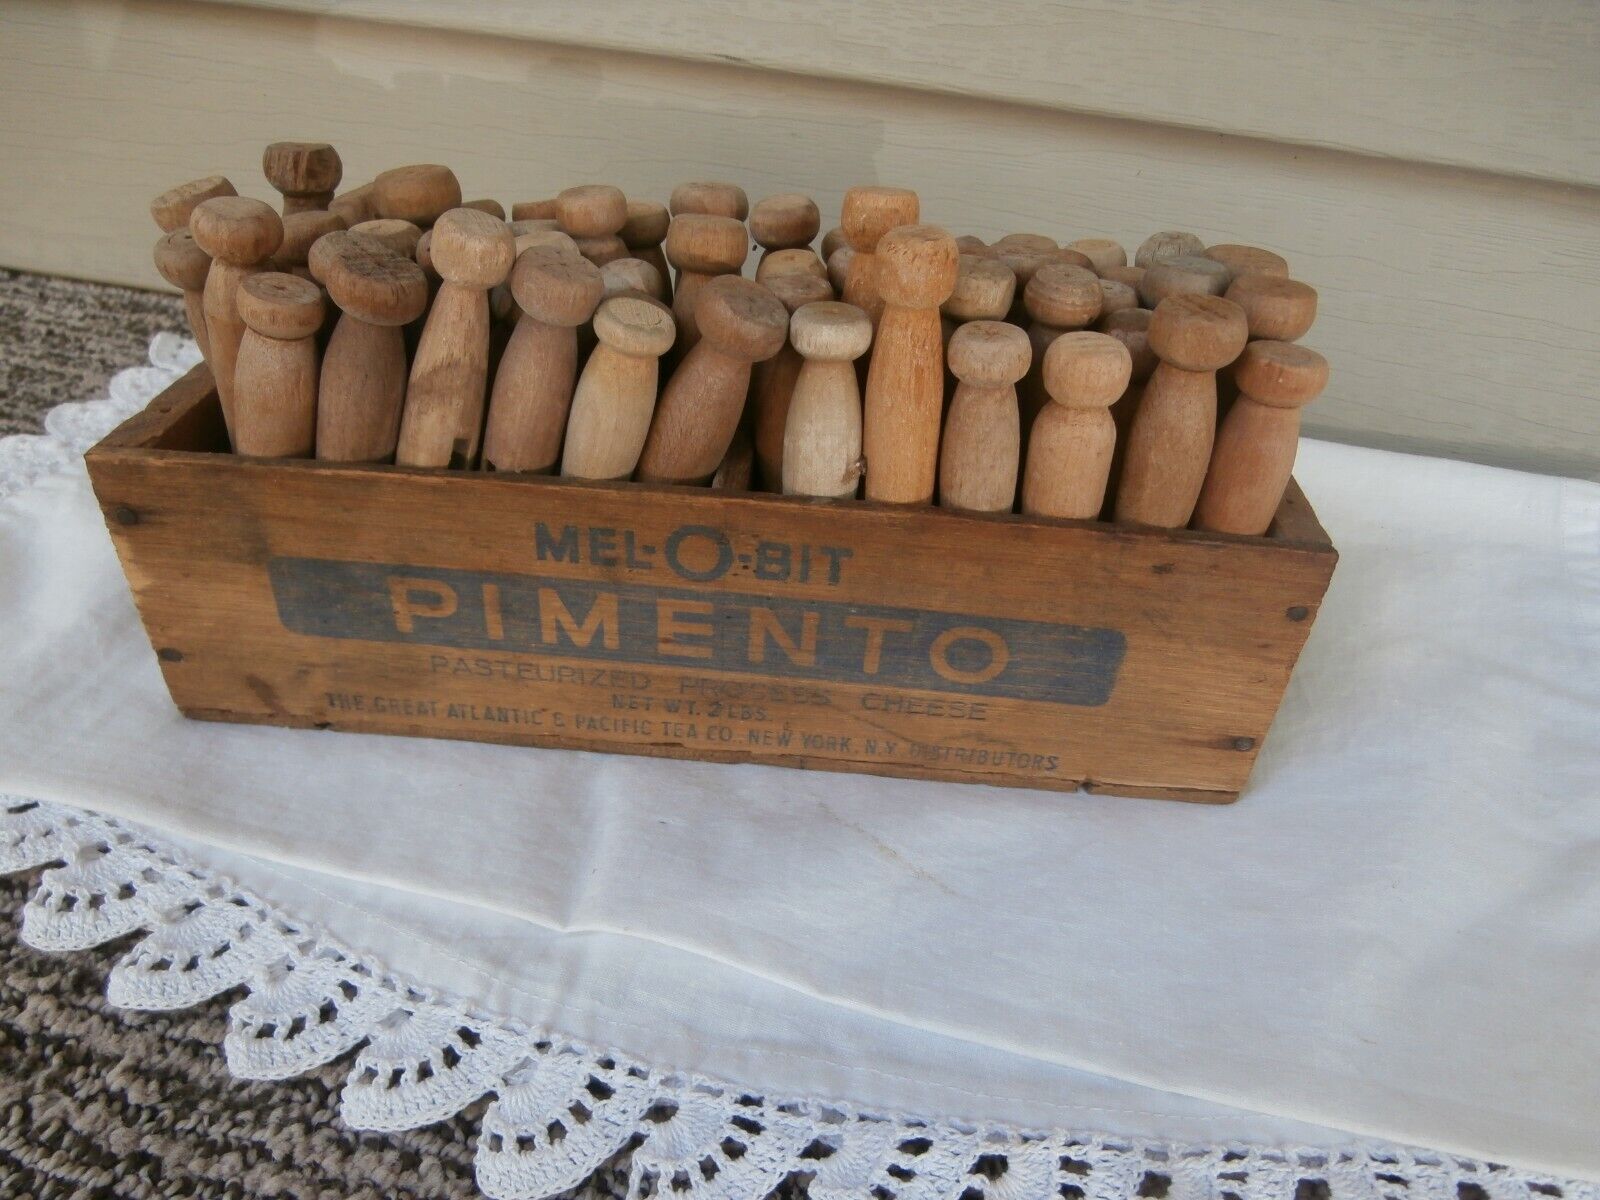 Vtg WOOD CLOTHES PINS in Mel-O-Bit WOOD Cheese BOX~COUNTRY DECOR 4 LAUNDRY ROOM